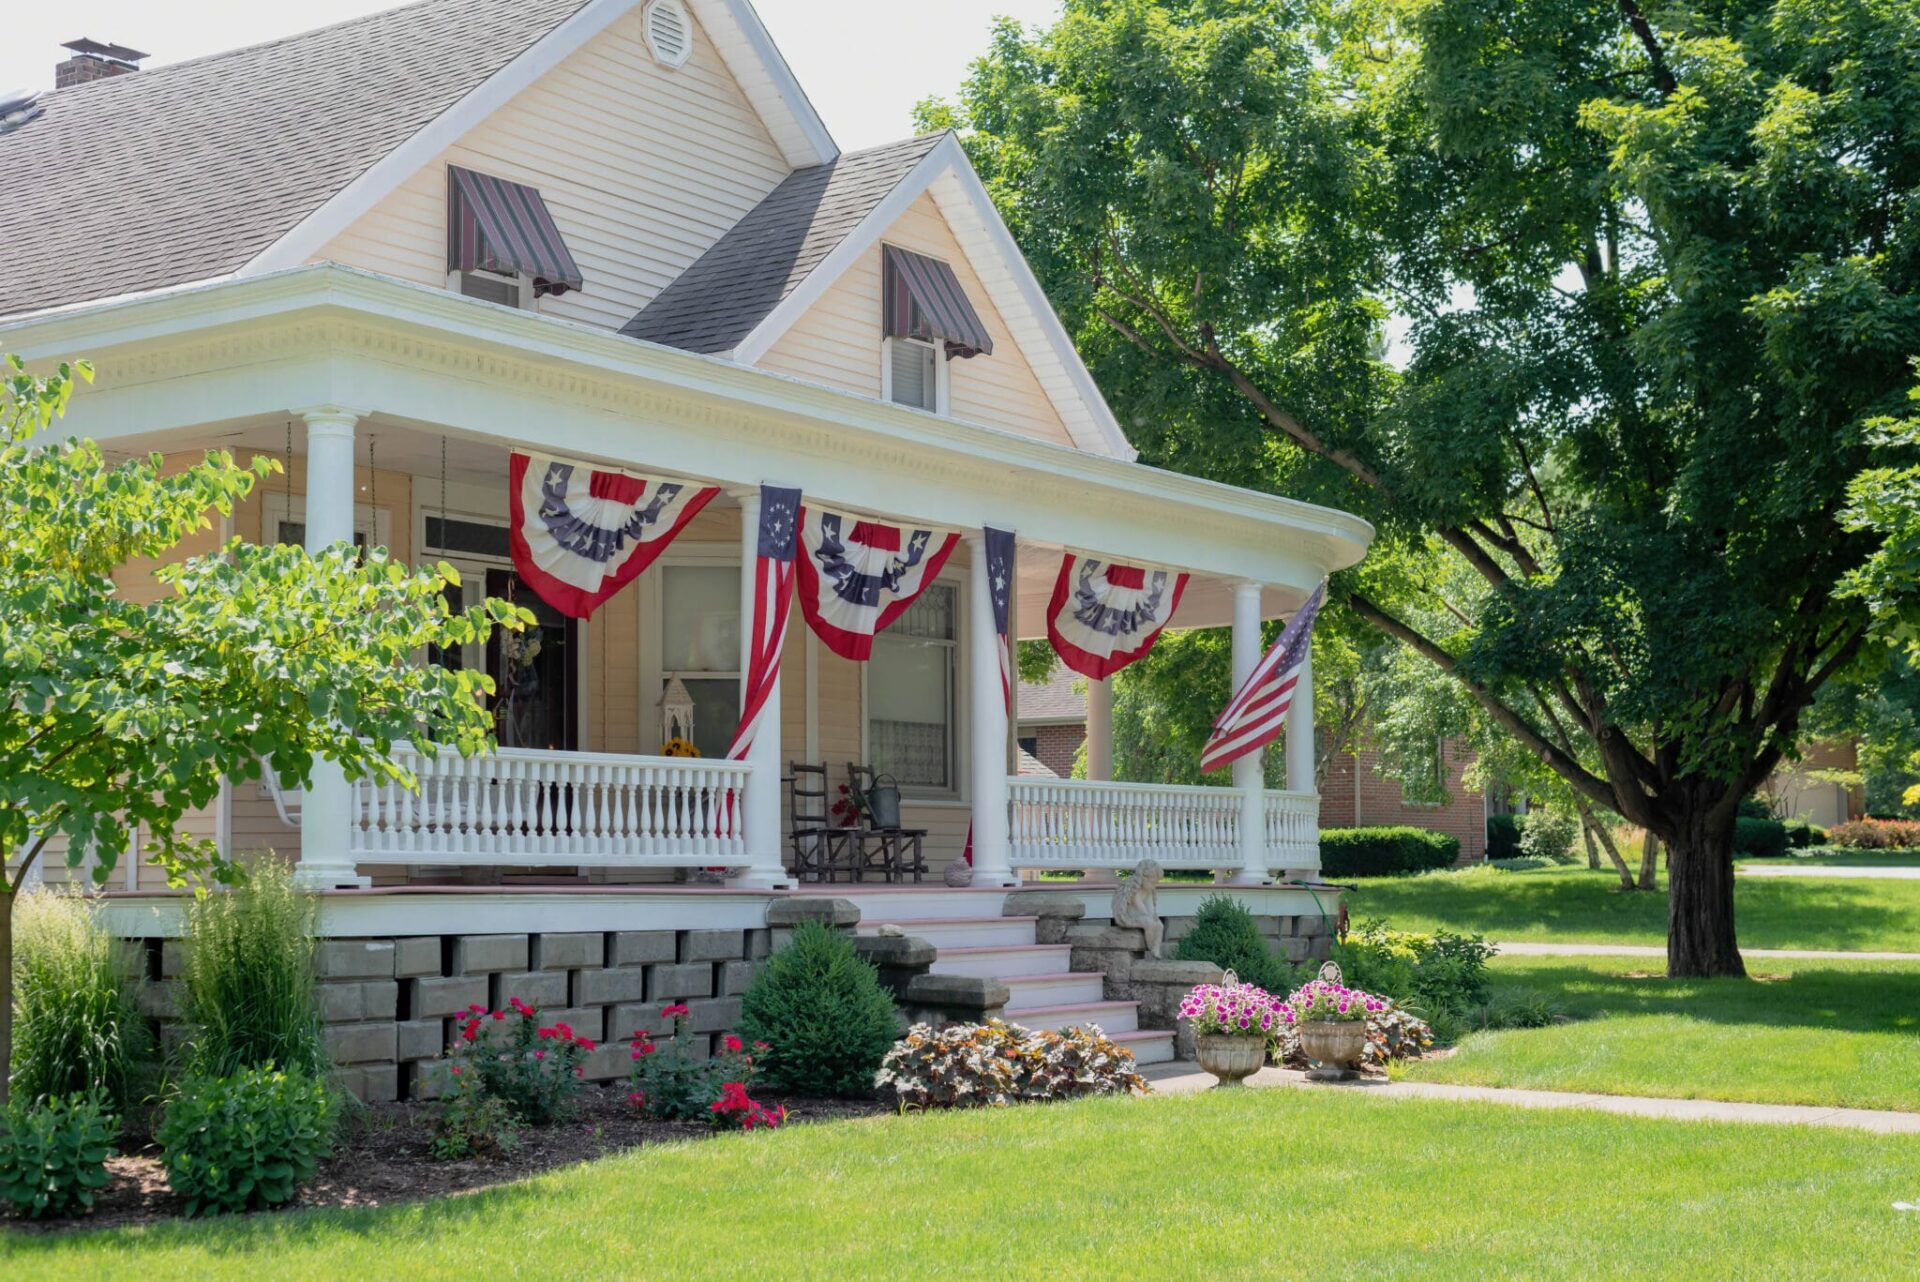 Charming home decorated with American flags.